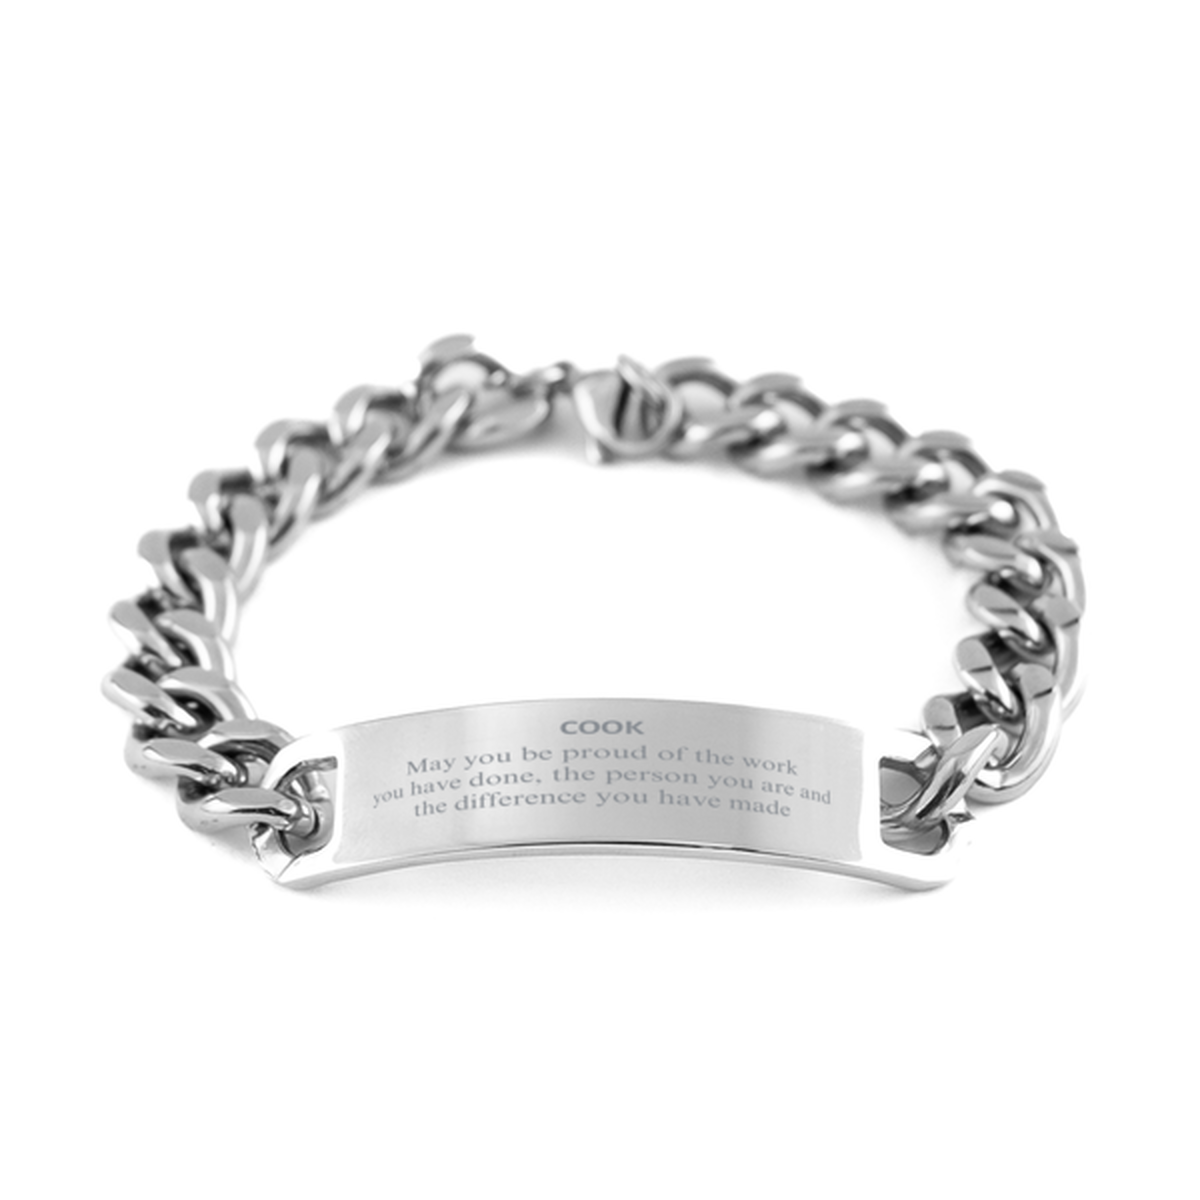 Cook May you be proud of the work you have done, Retirement Cook Cuban Chain Stainless Steel Bracelet for Colleague Appreciation Gifts Amazing for Cook